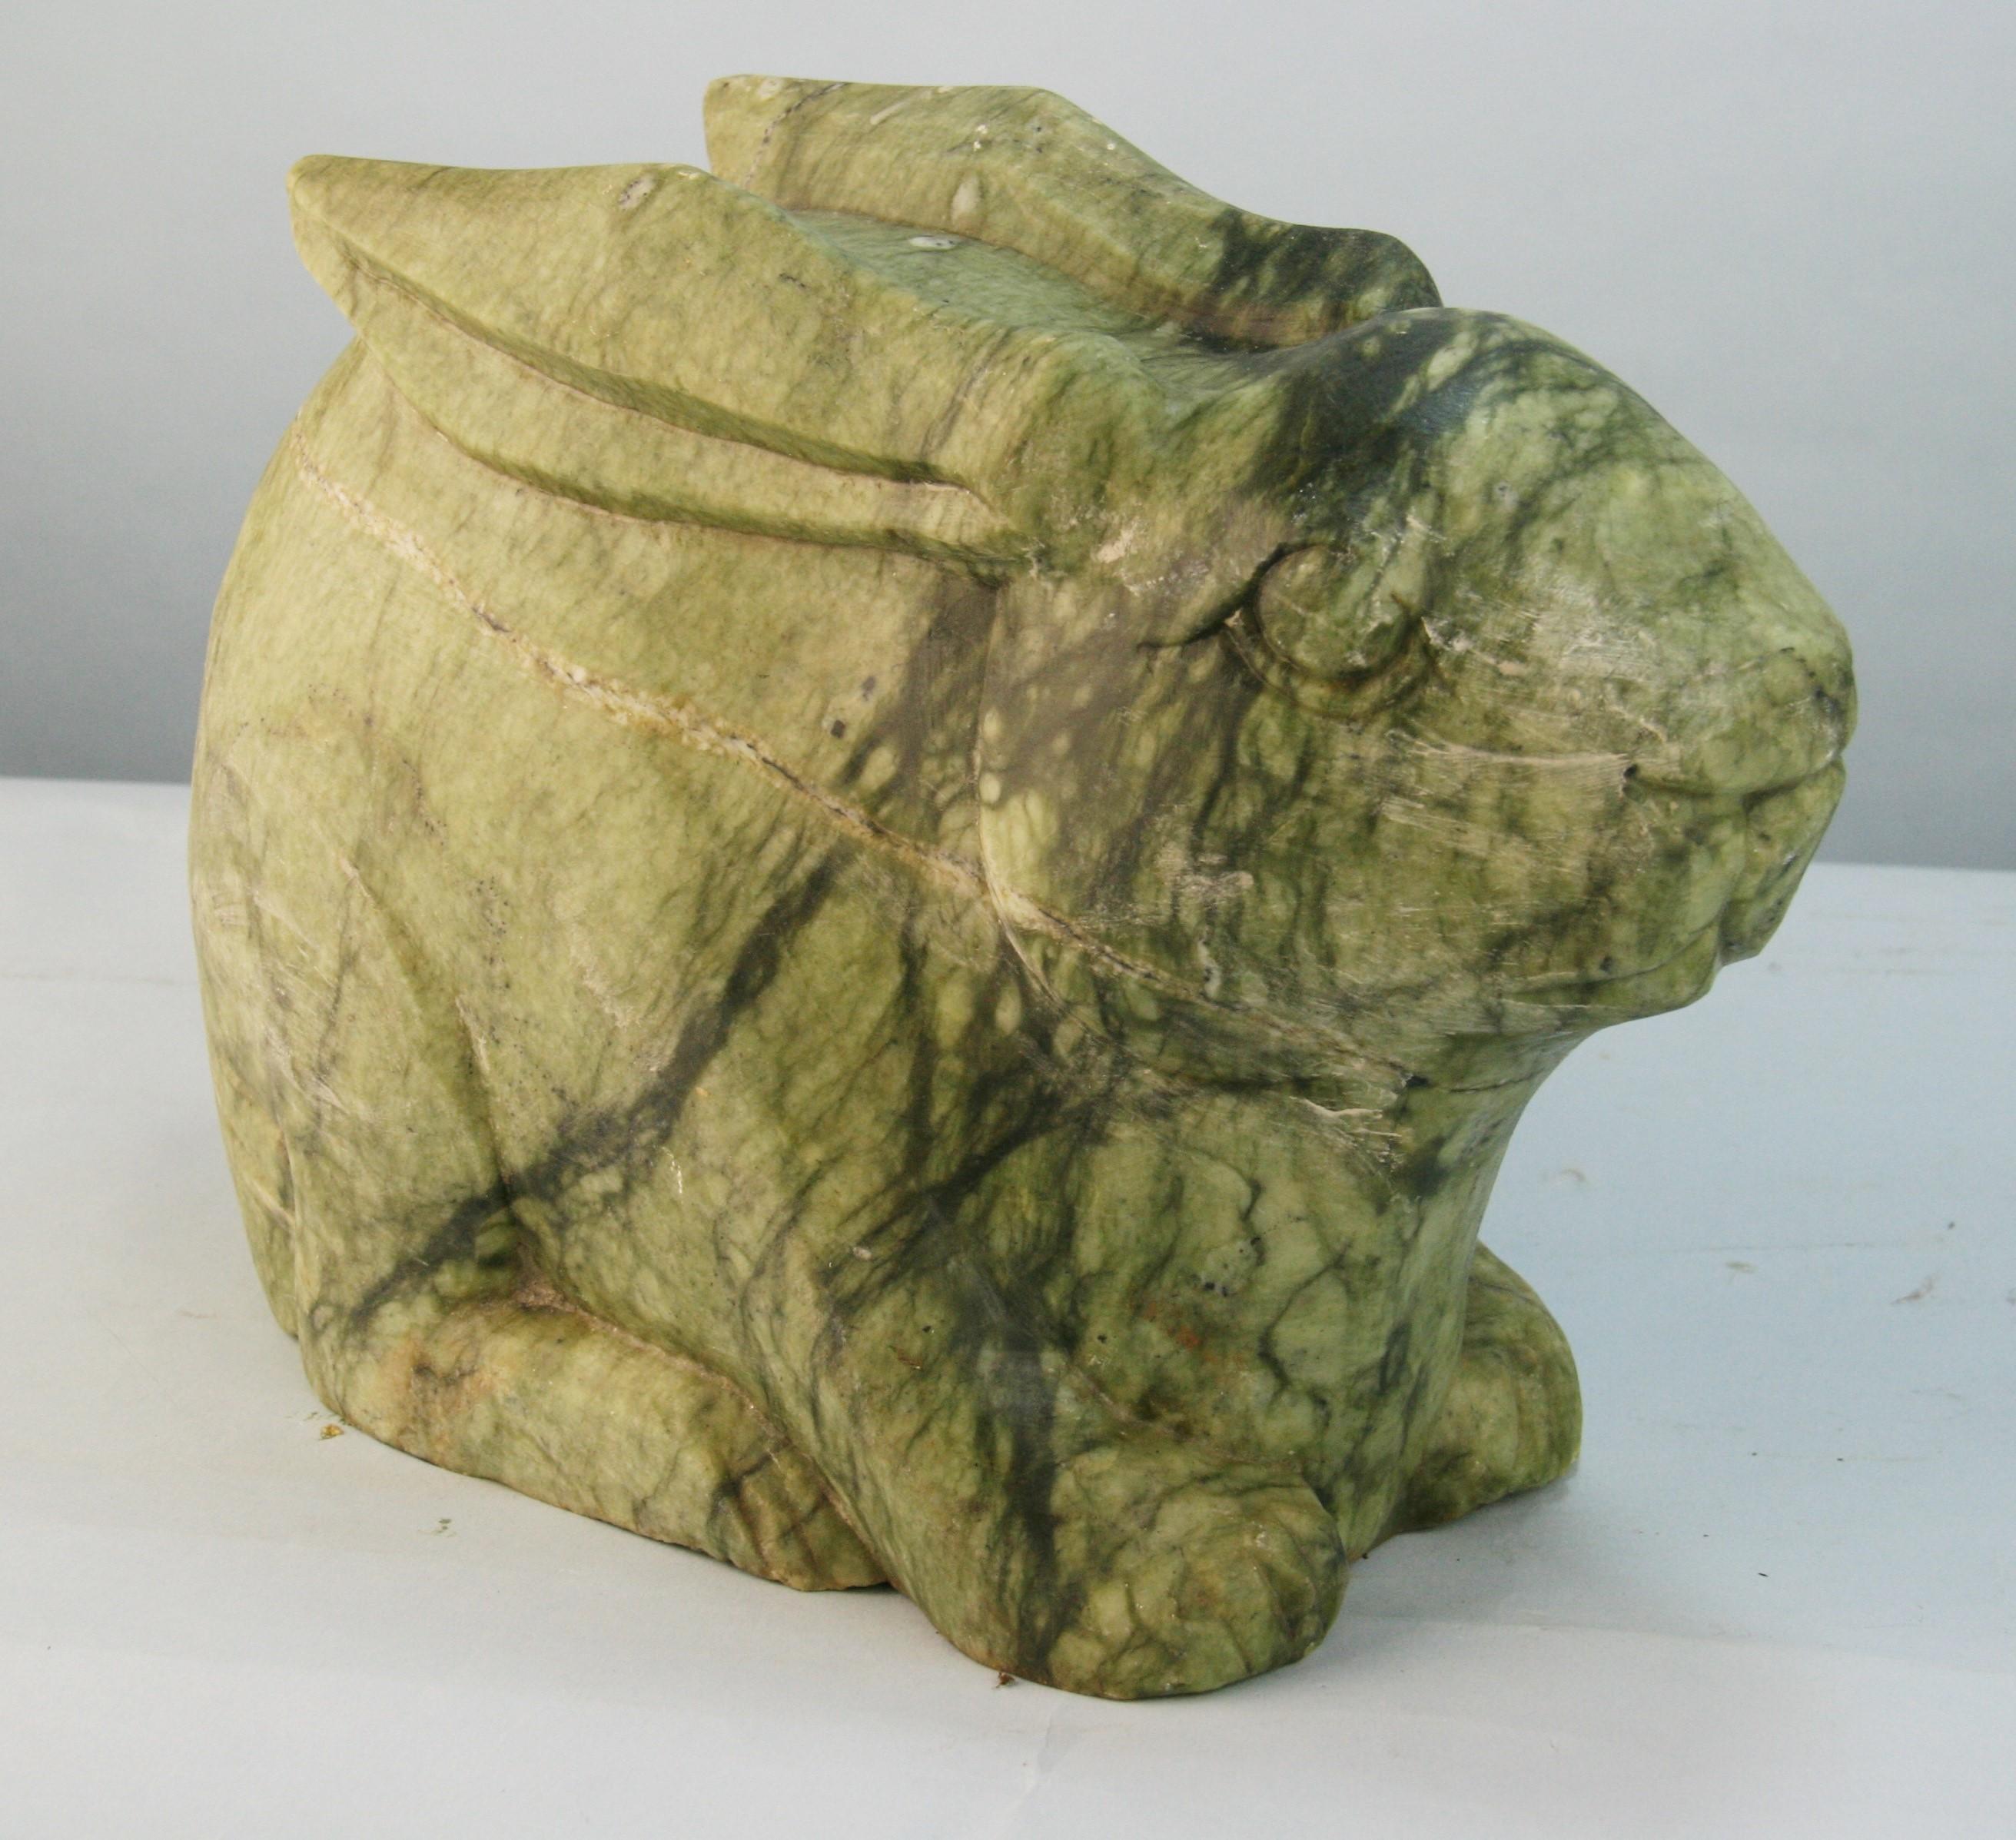 Japanese hand carved green stone rabbit
Rabbit weighs 33 lbs.